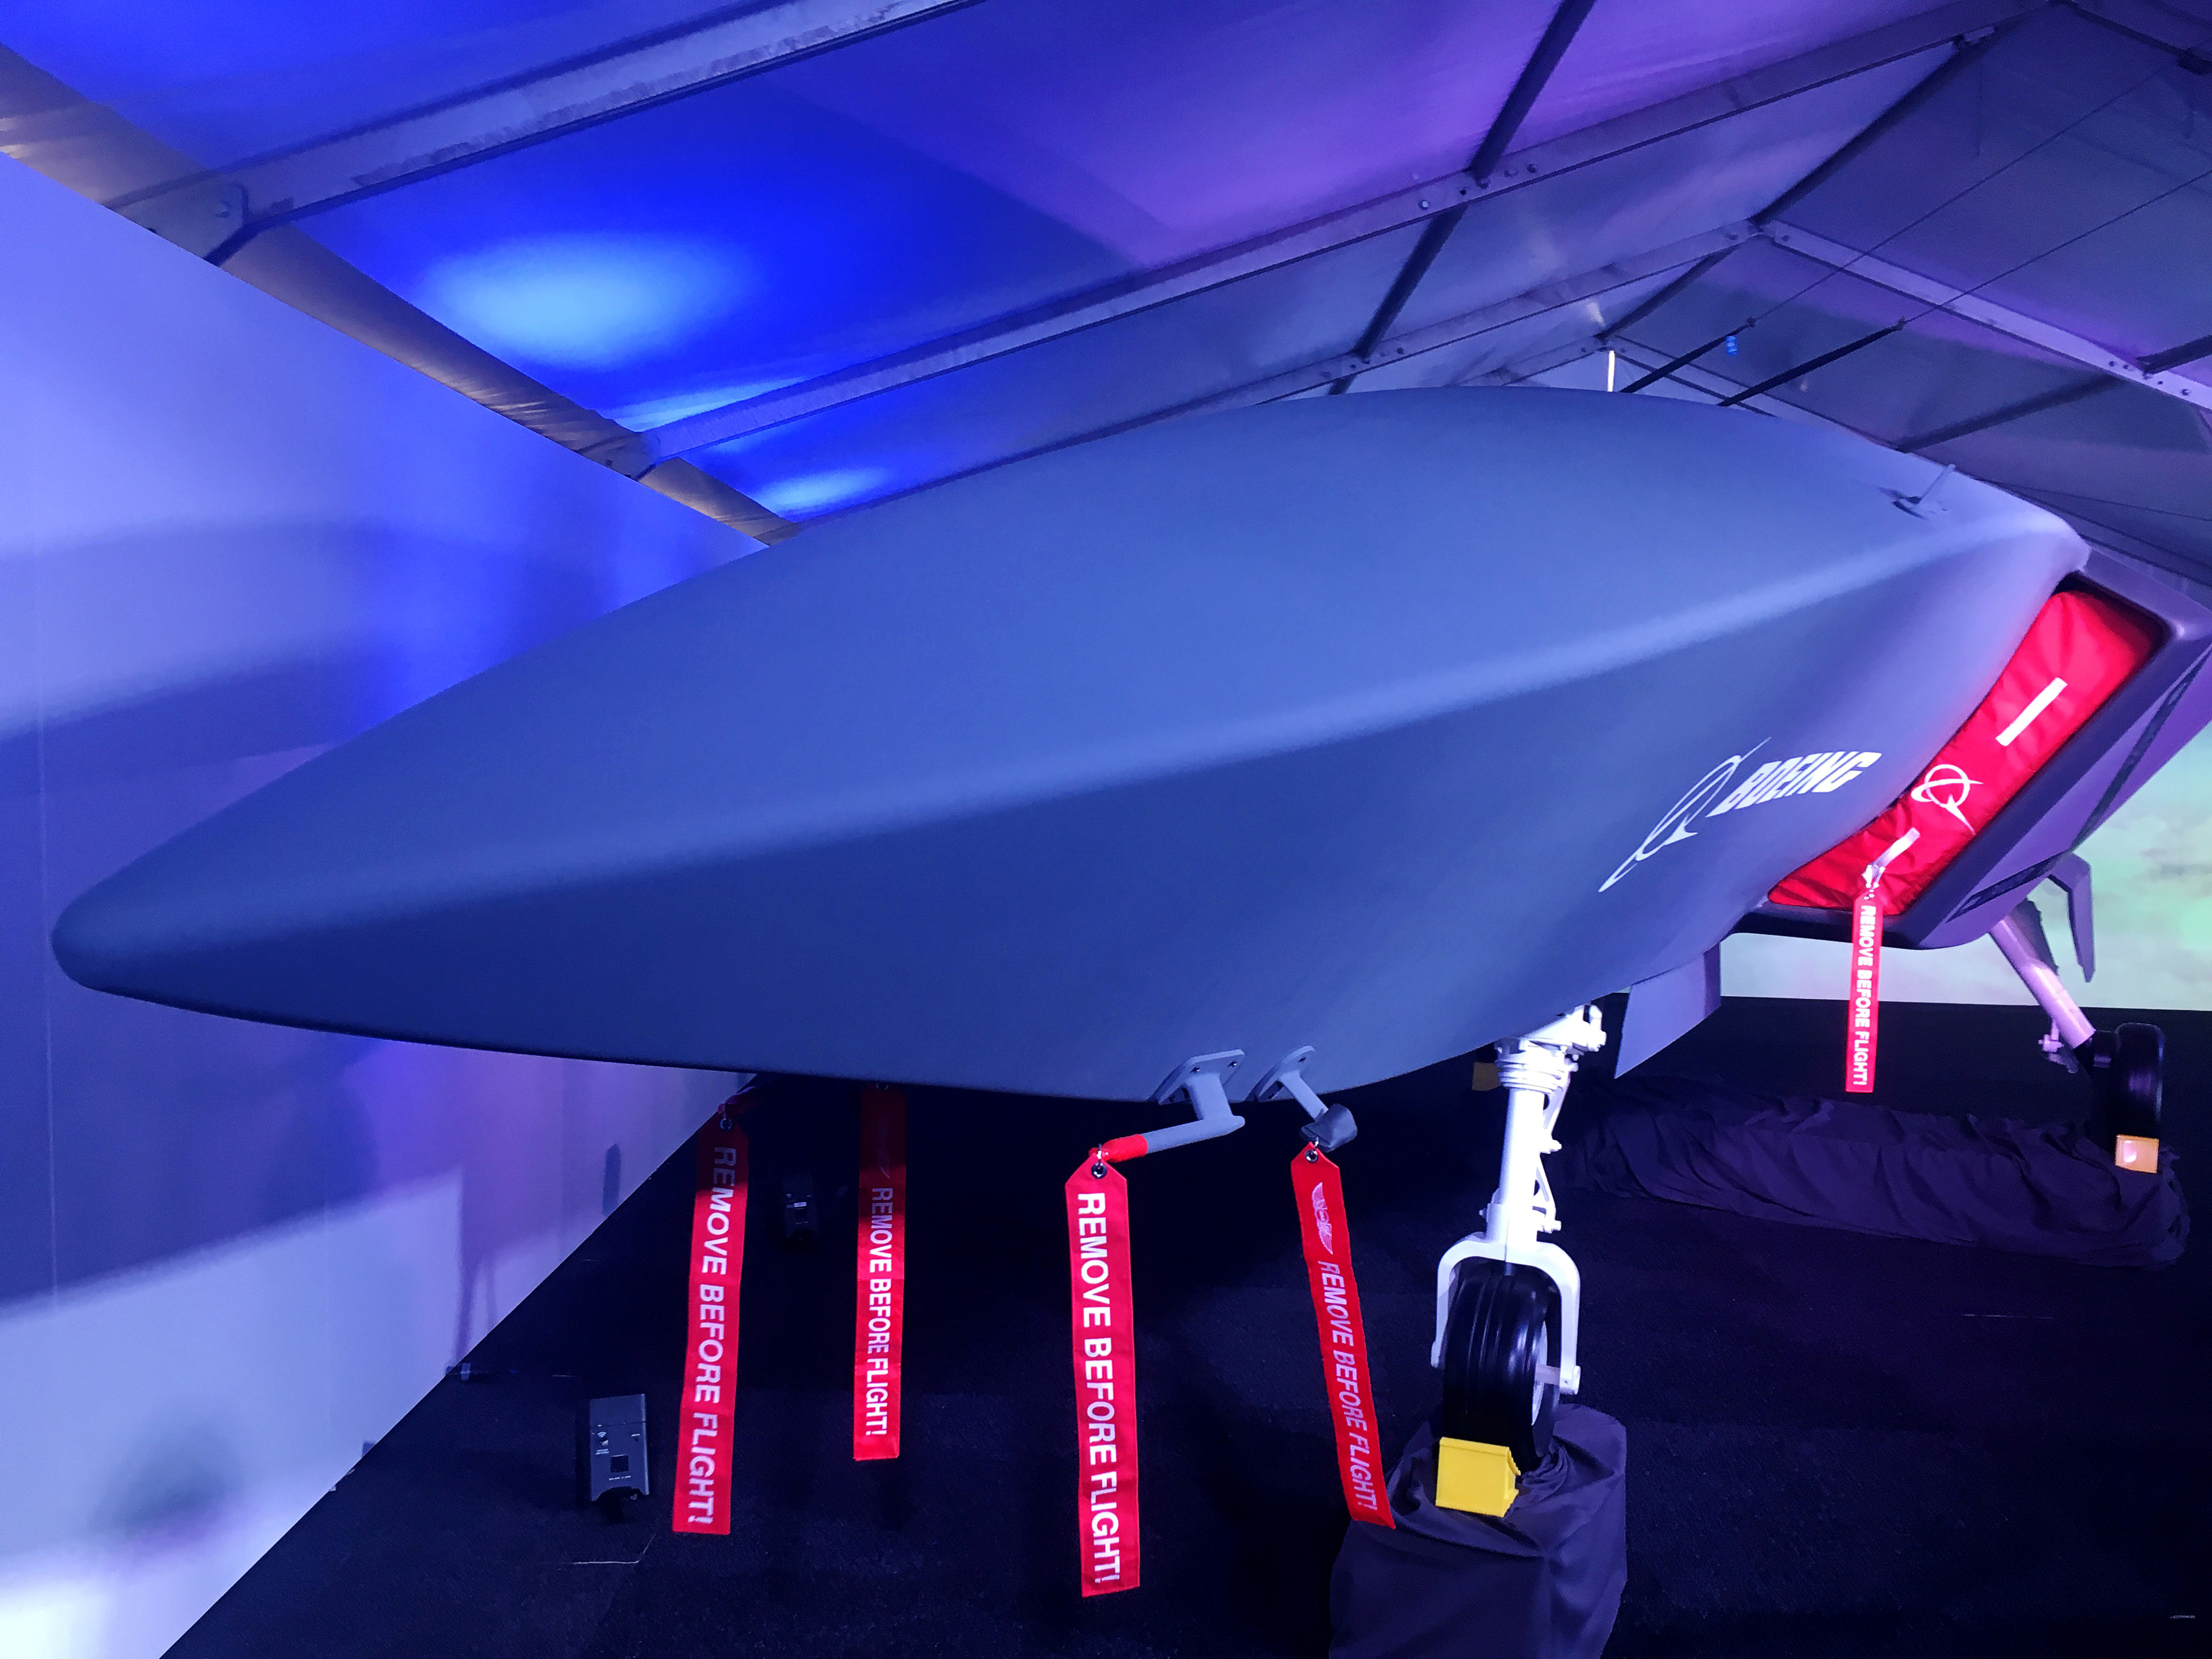 A model of Boeing's pilotless fighter-like jet 'Loyal Wingman' is displayed in Avalon